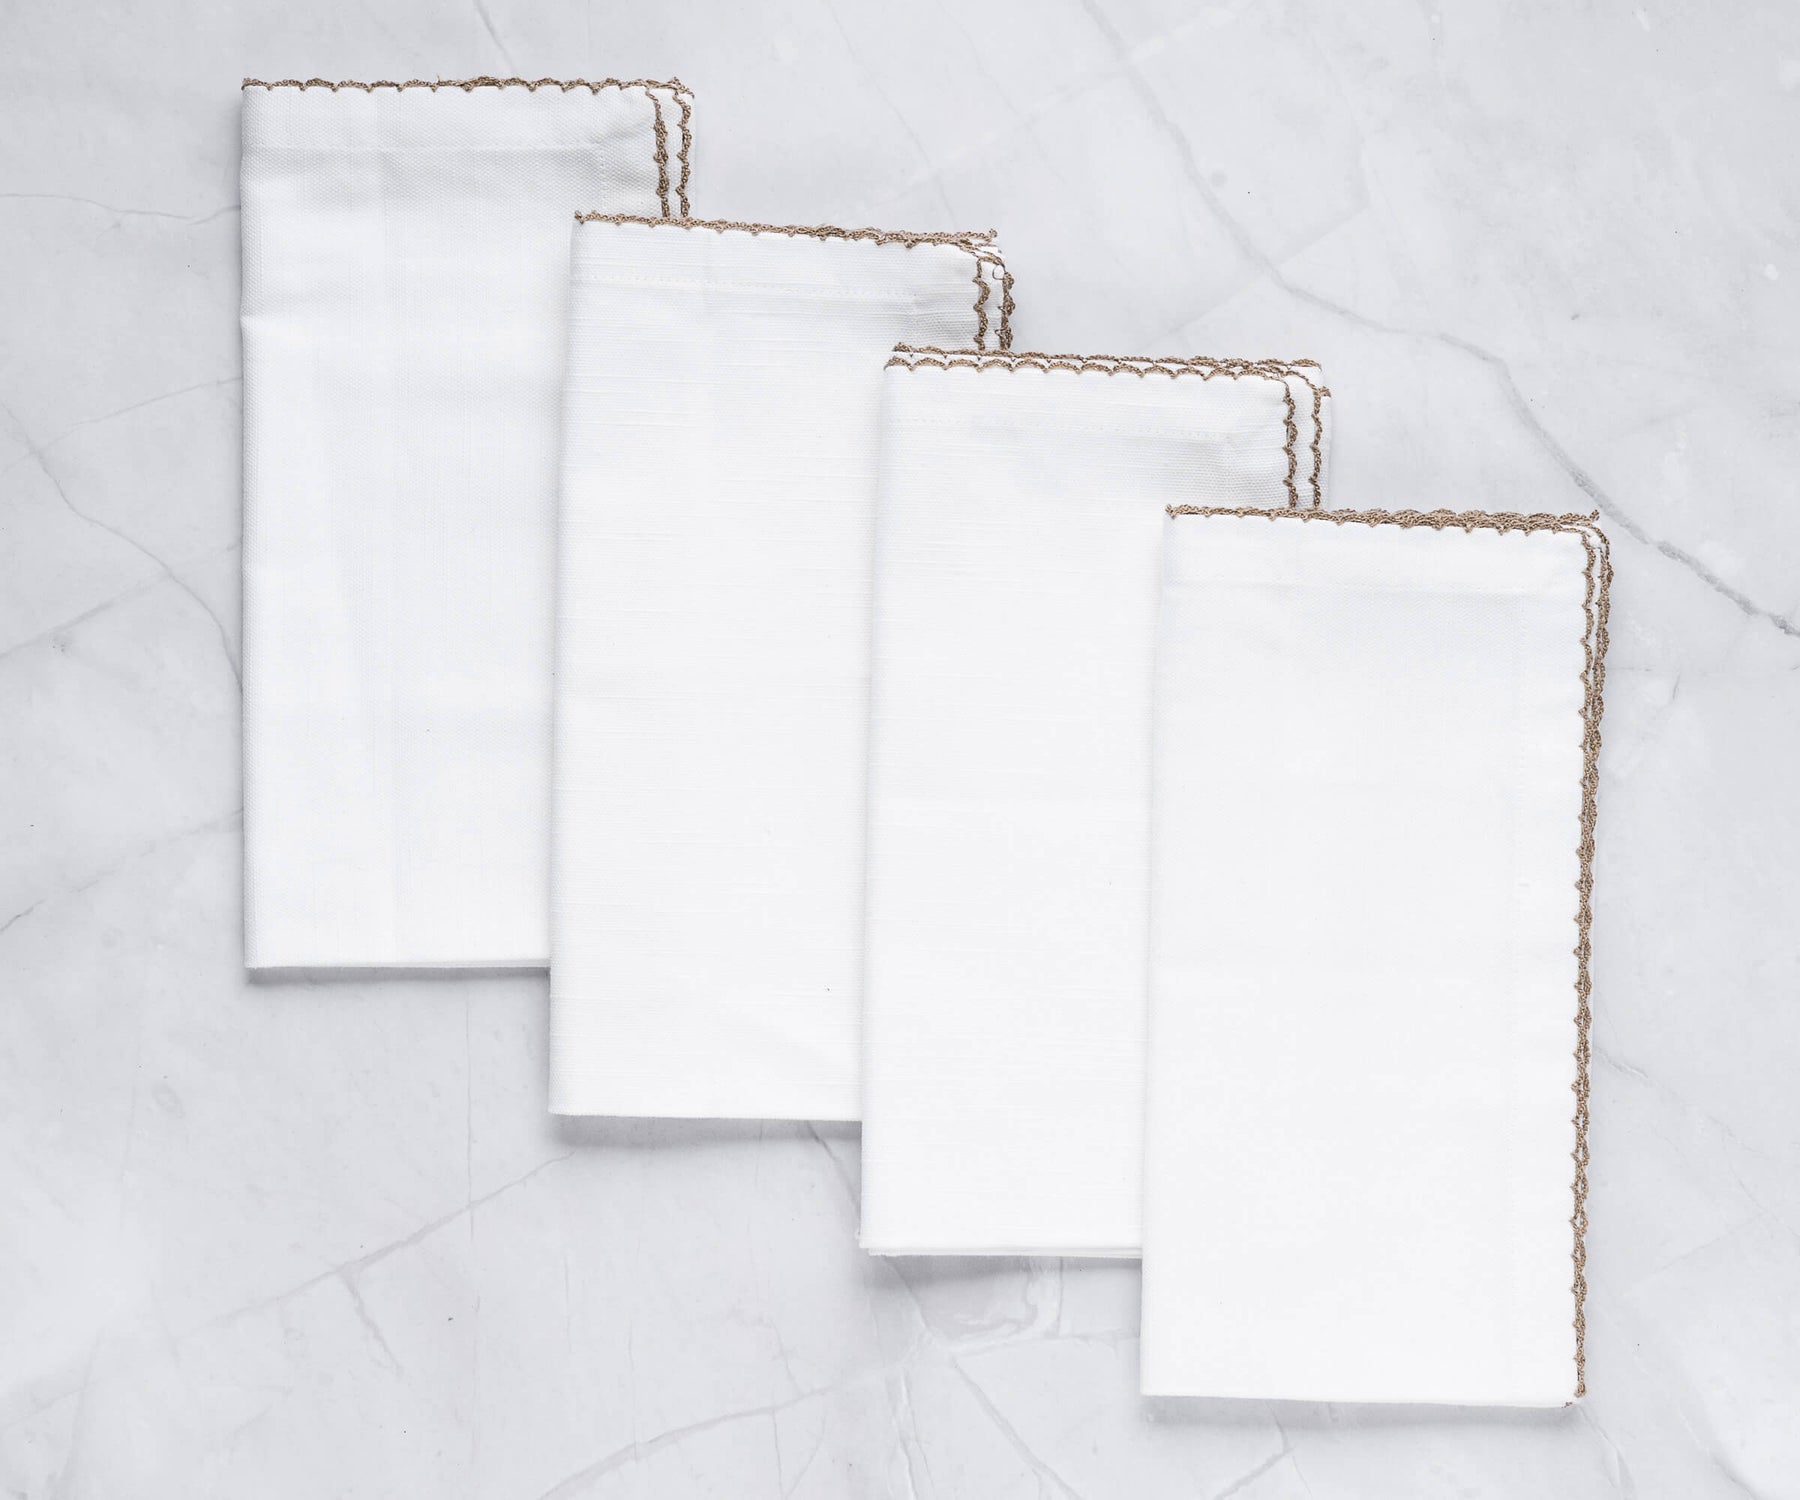 Four luxurious shell edge napkins with gold trim arranged on a marble countertop